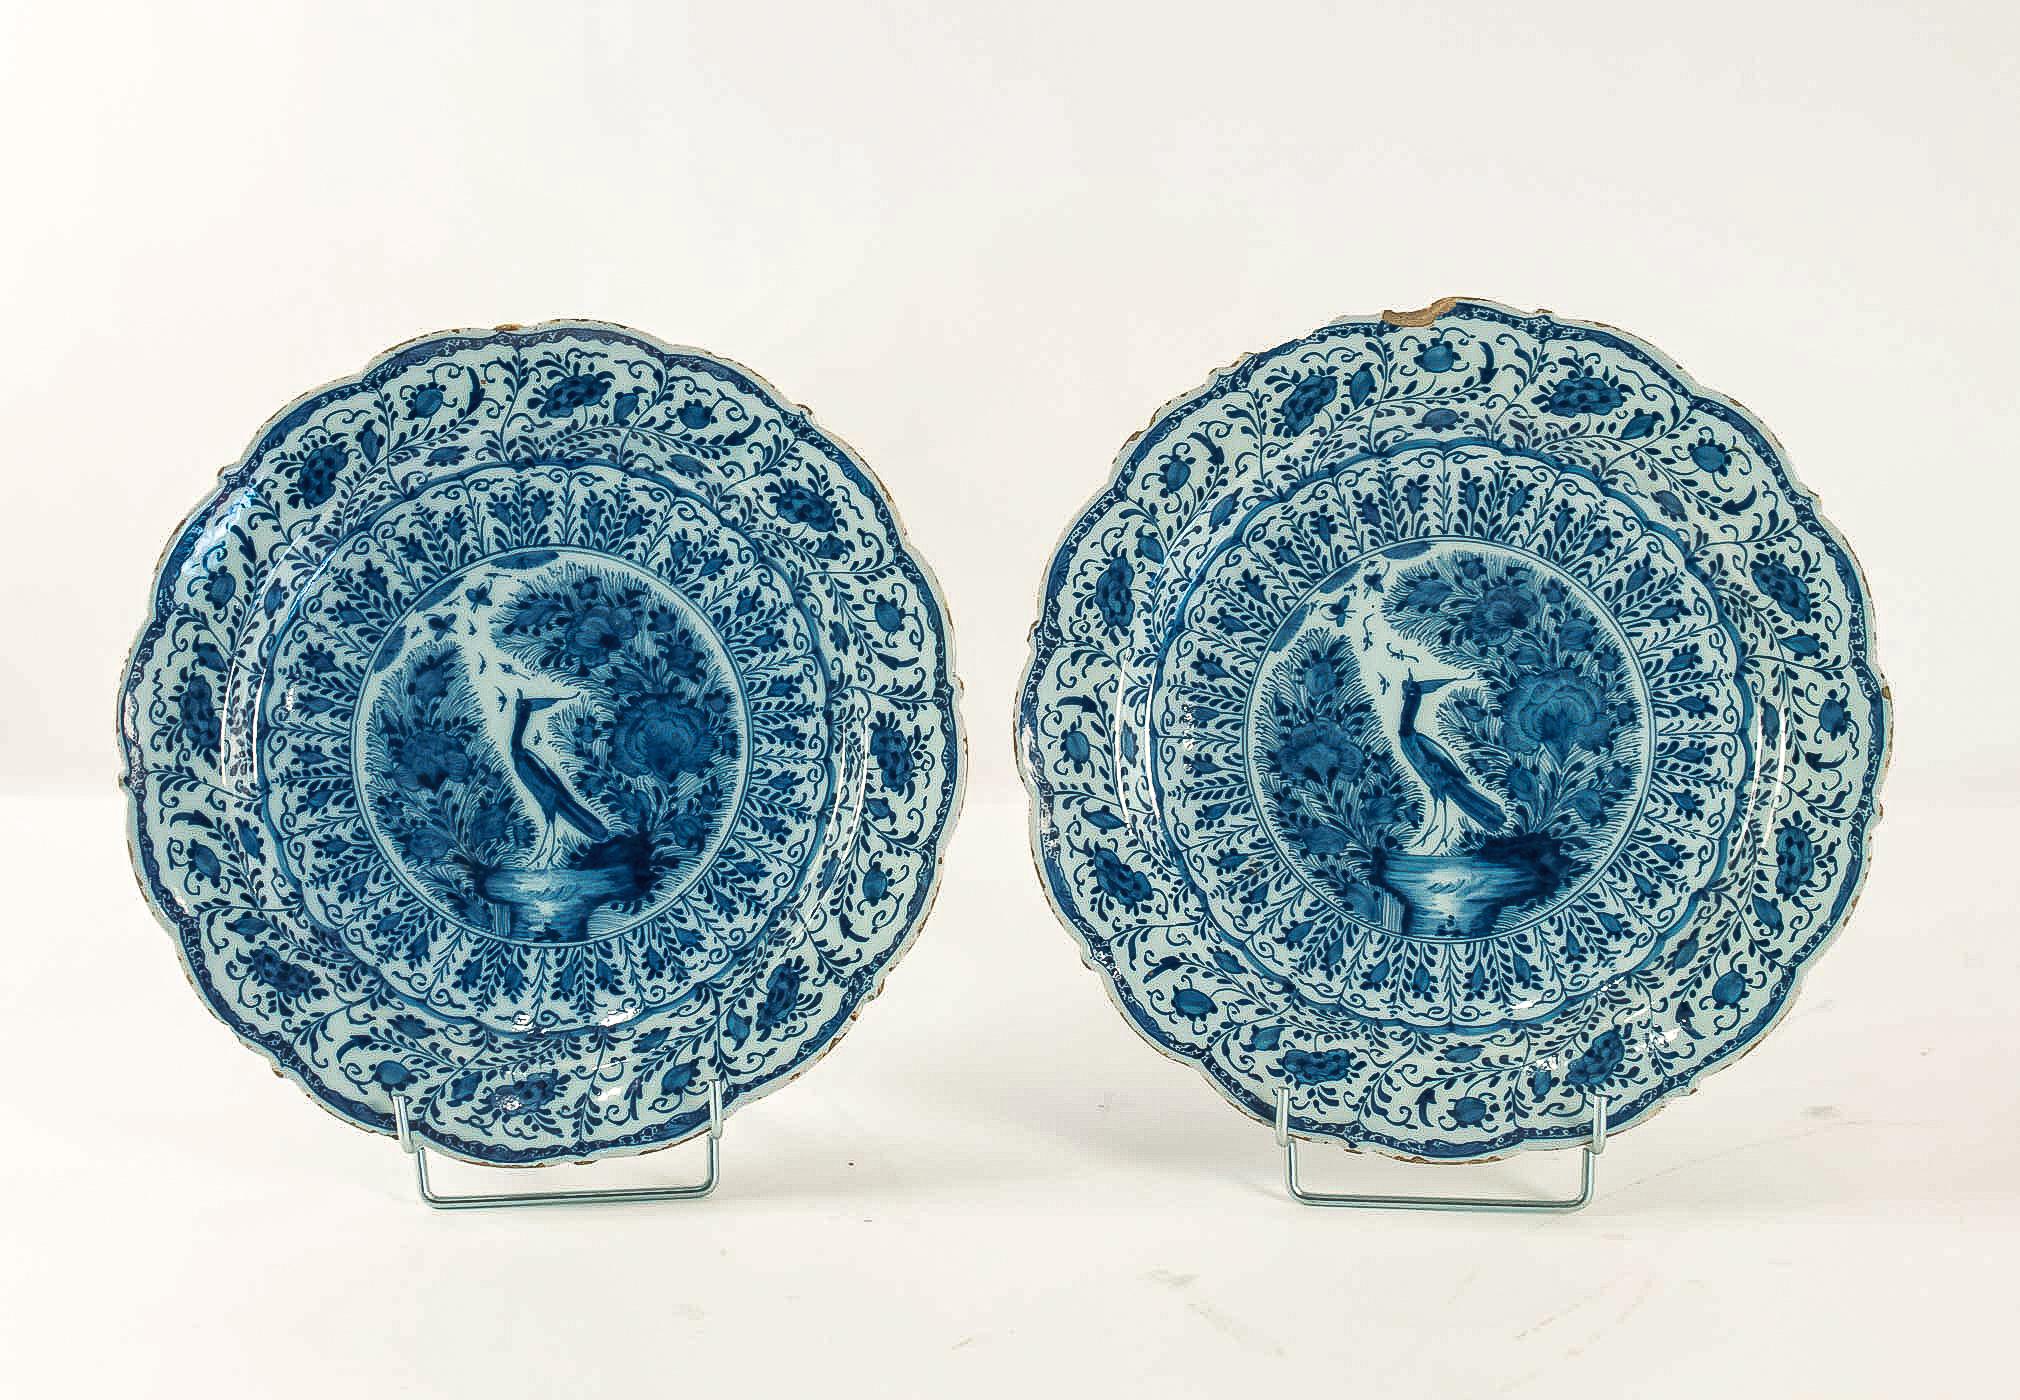 Dutch Sign by Ax, Mid-18th Century, Magnificent Pair of Faience Delft Round Dishes